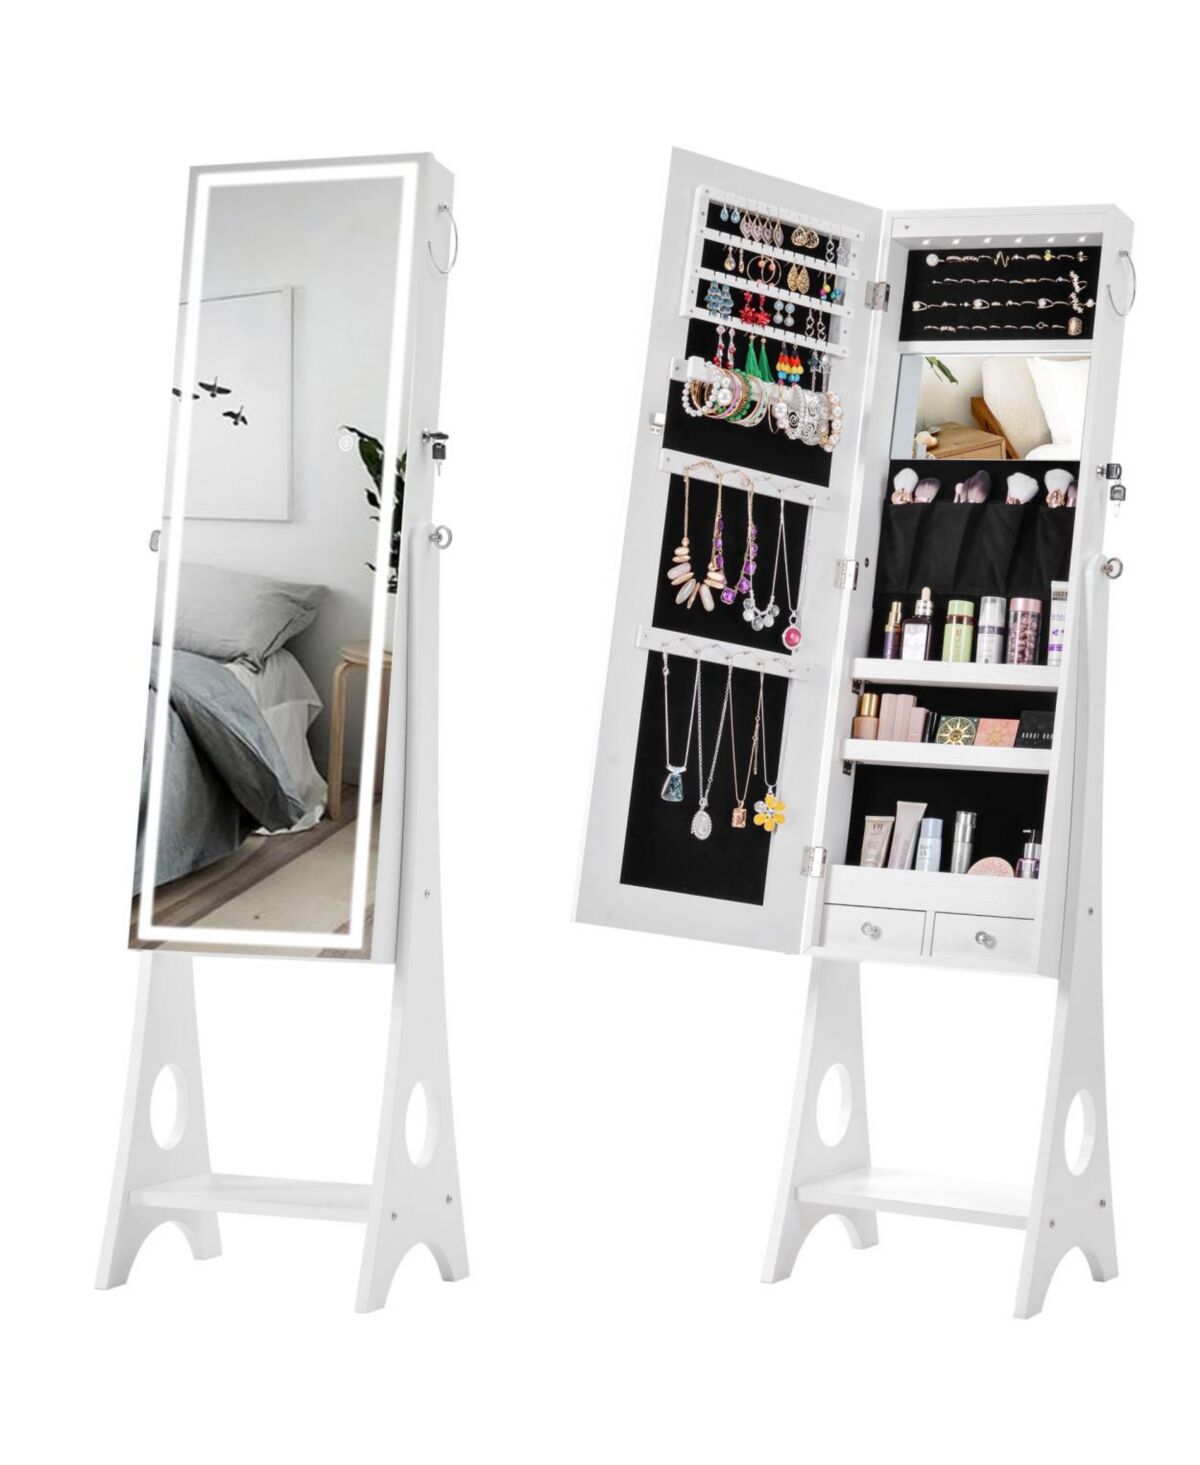 Simplie Fun Fashion Simple Jewelry Storage Mirror Cabinet With Led Lights,For Living Room Or Bedroom - White